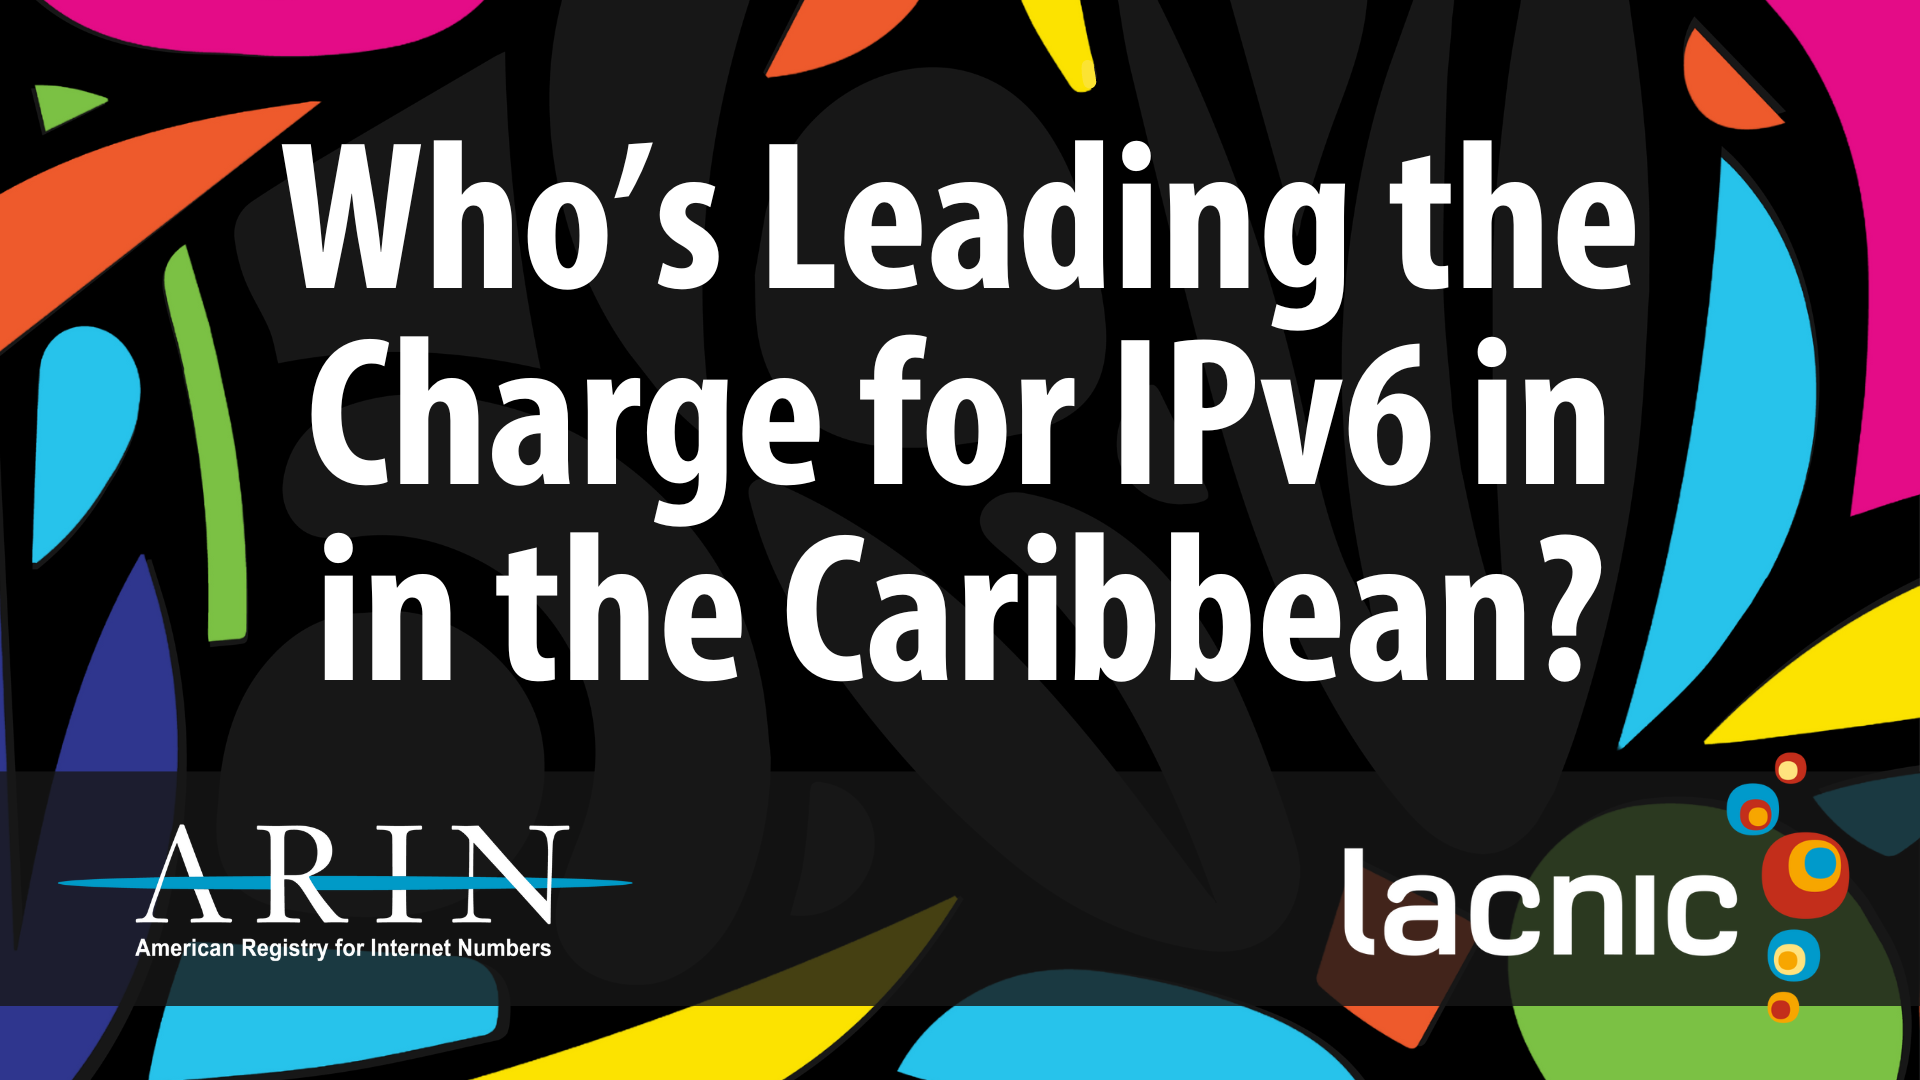 Who’s Leading the Charge for IPv6 in the Caribbean?